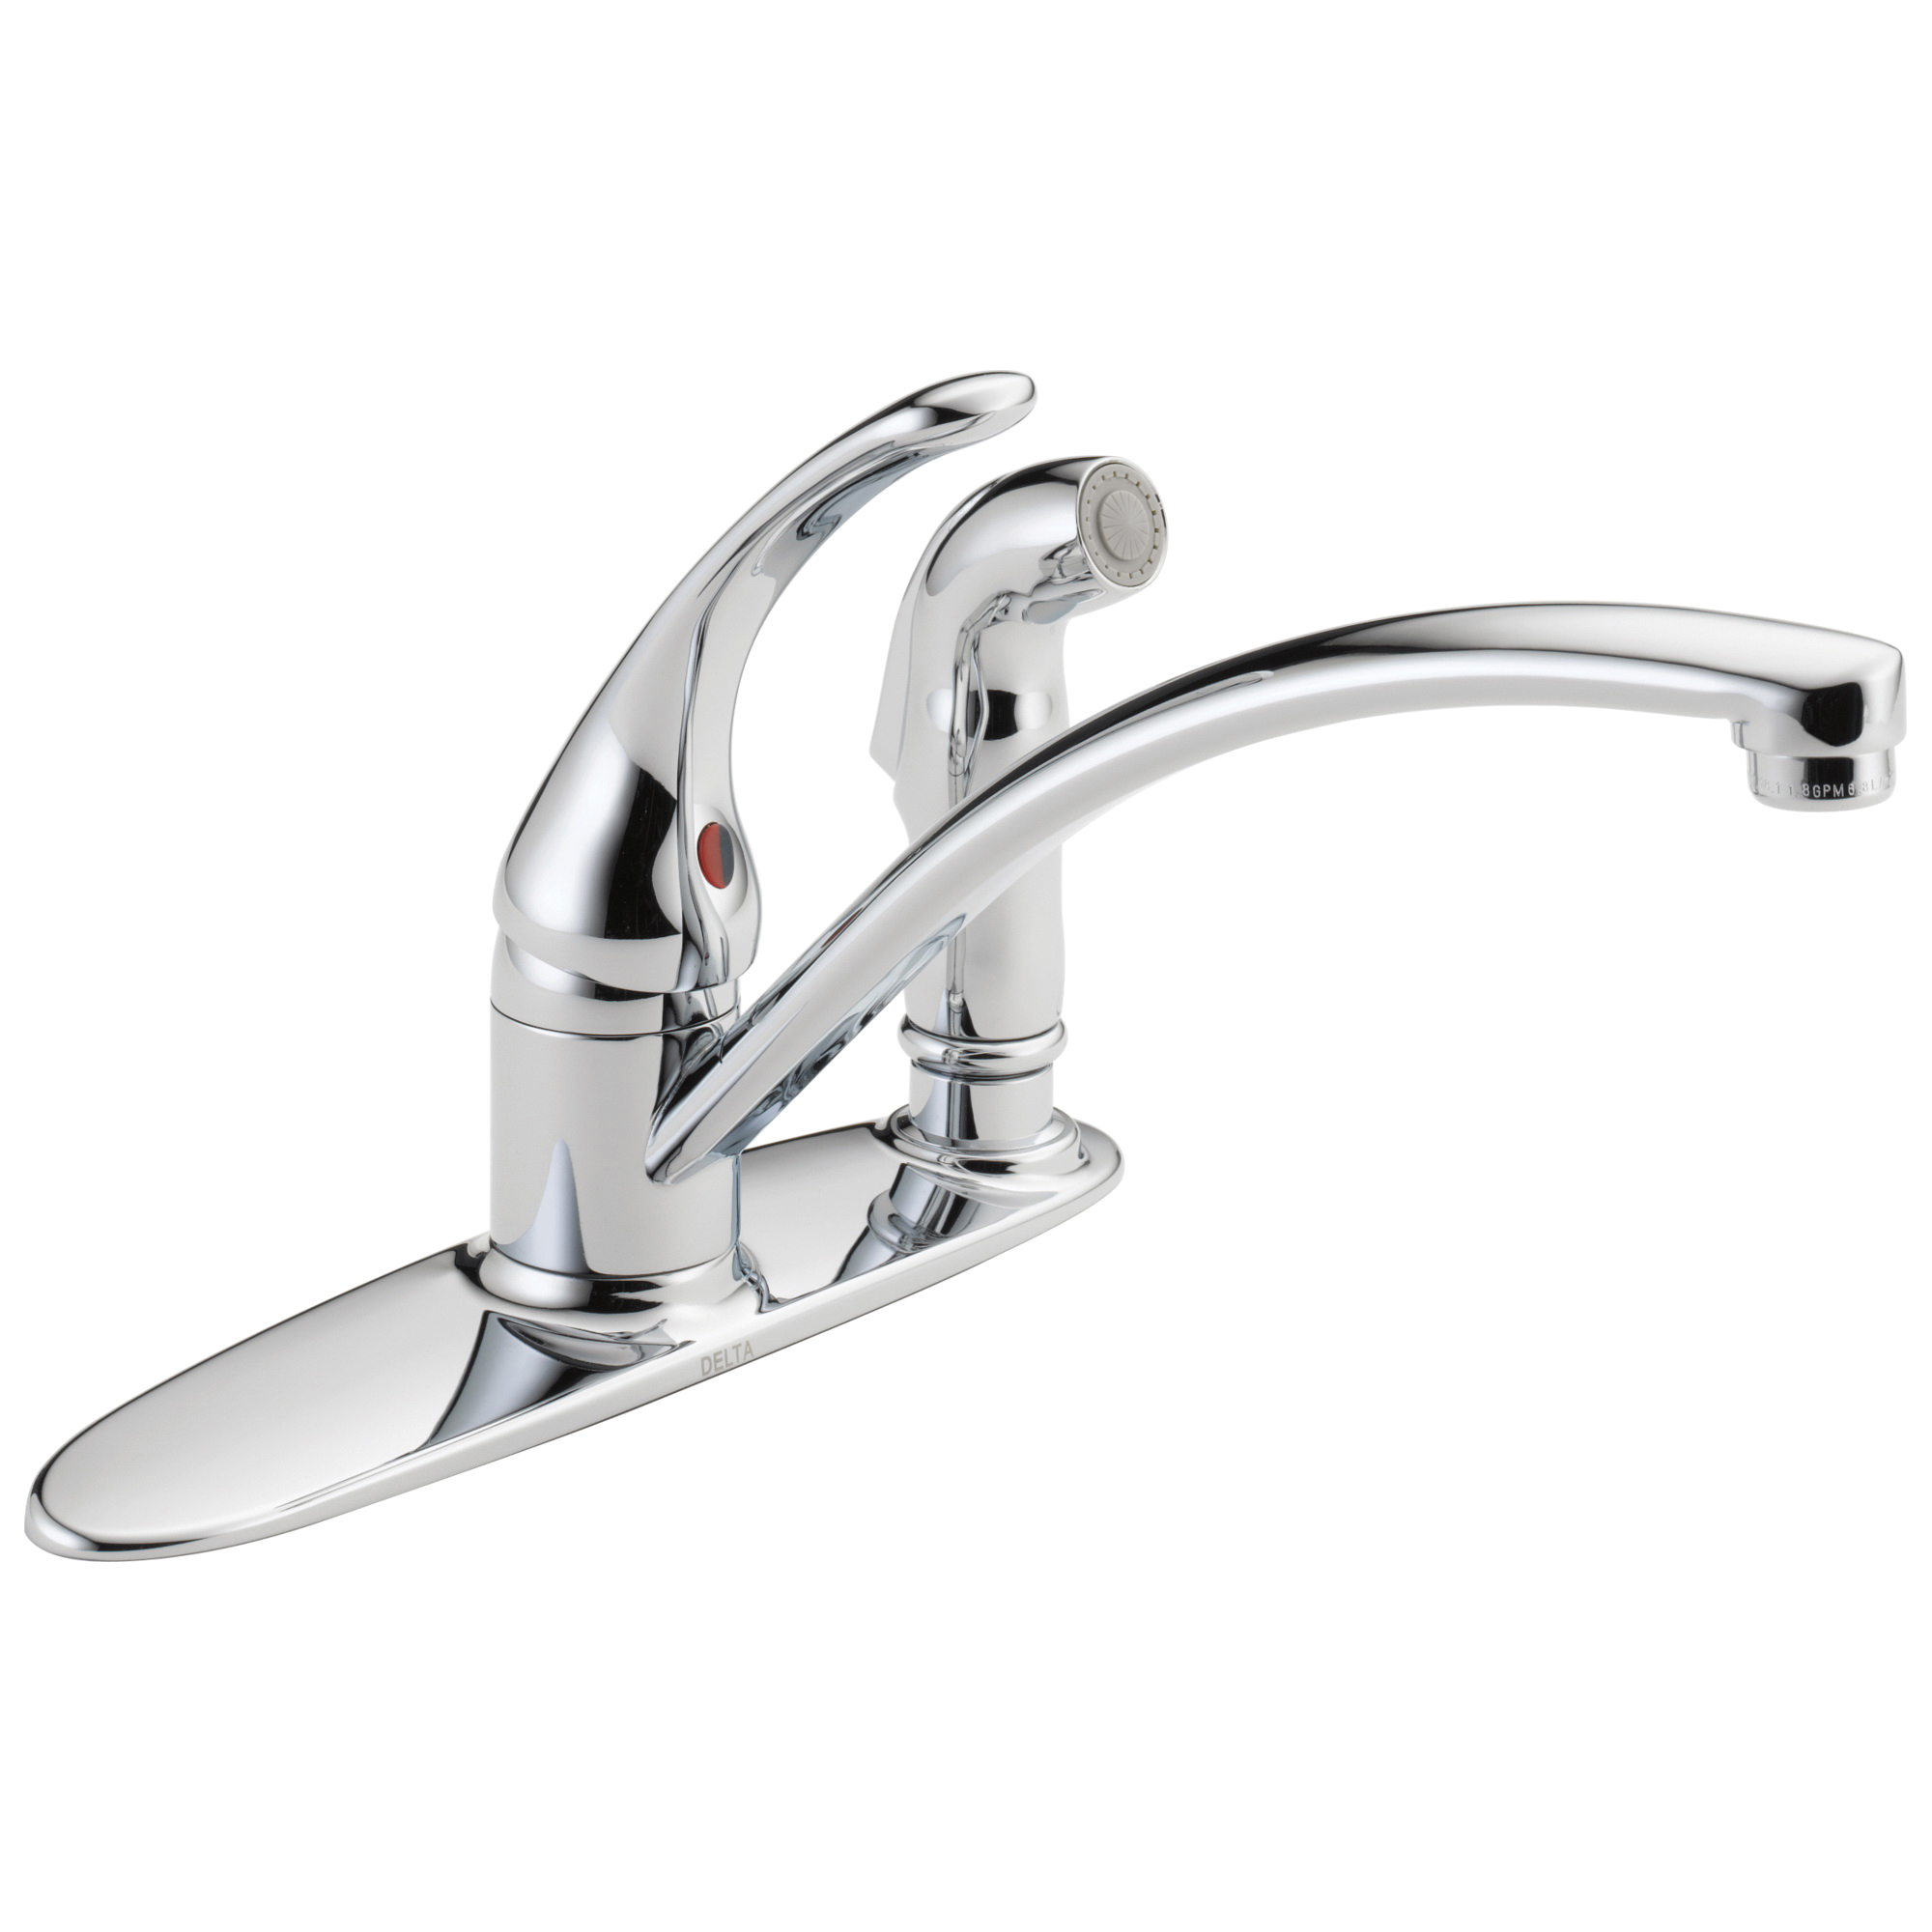 DELTA® B3310LF Kitchen Faucet, Foundations®, 1.8 gpm Flow Rate, 8 in Center, Swivel Spout, Polished Chrome, 1 Handles, Import